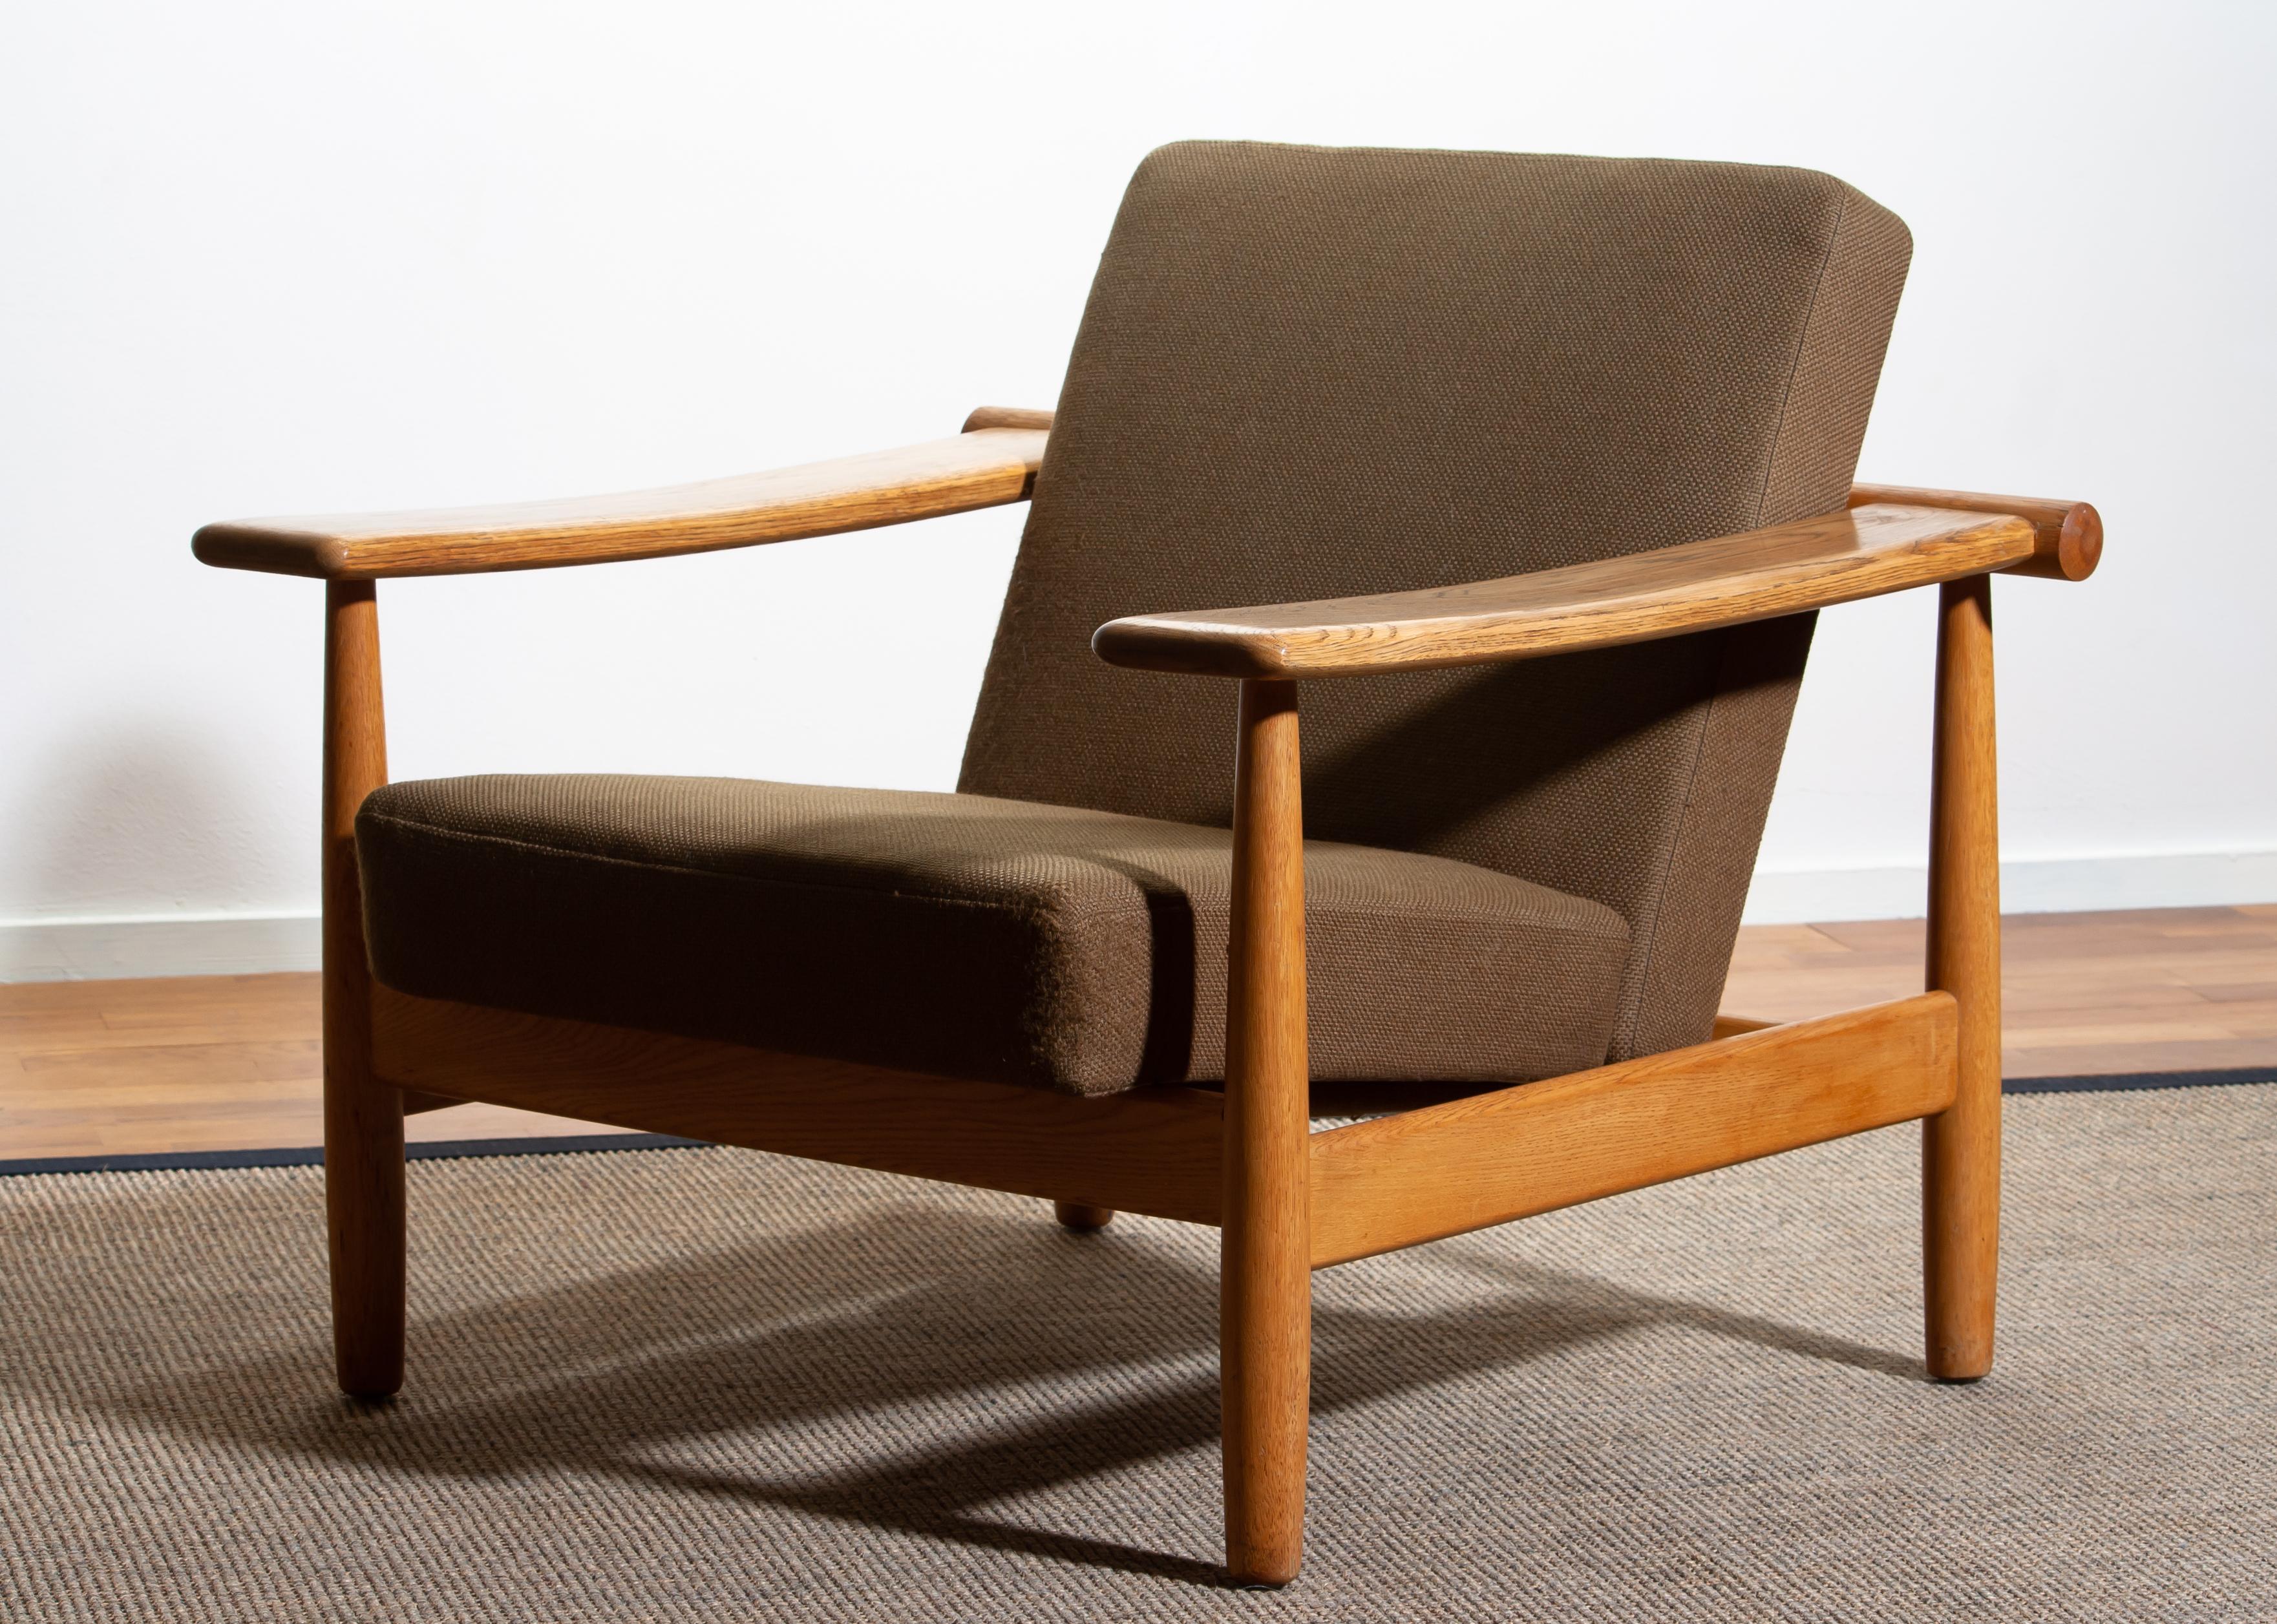 Mid-20th Century 1960s Oak Lounge Chair Living Room Set from Denmark in GETAMA Style